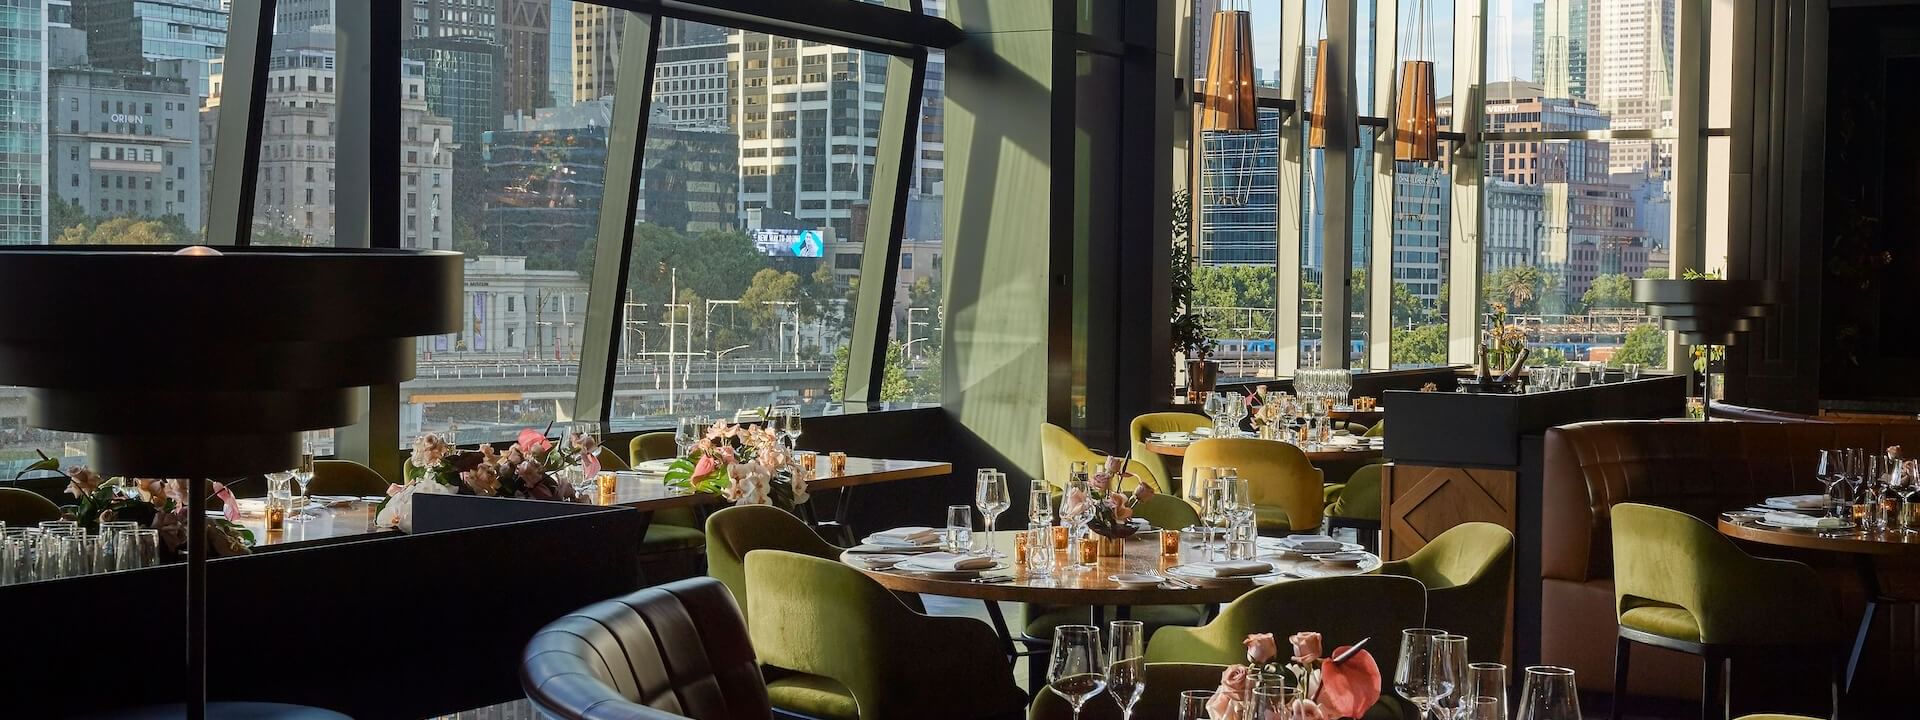 A dining & lounge area in a restaurant at Crown Hotel Melbourne